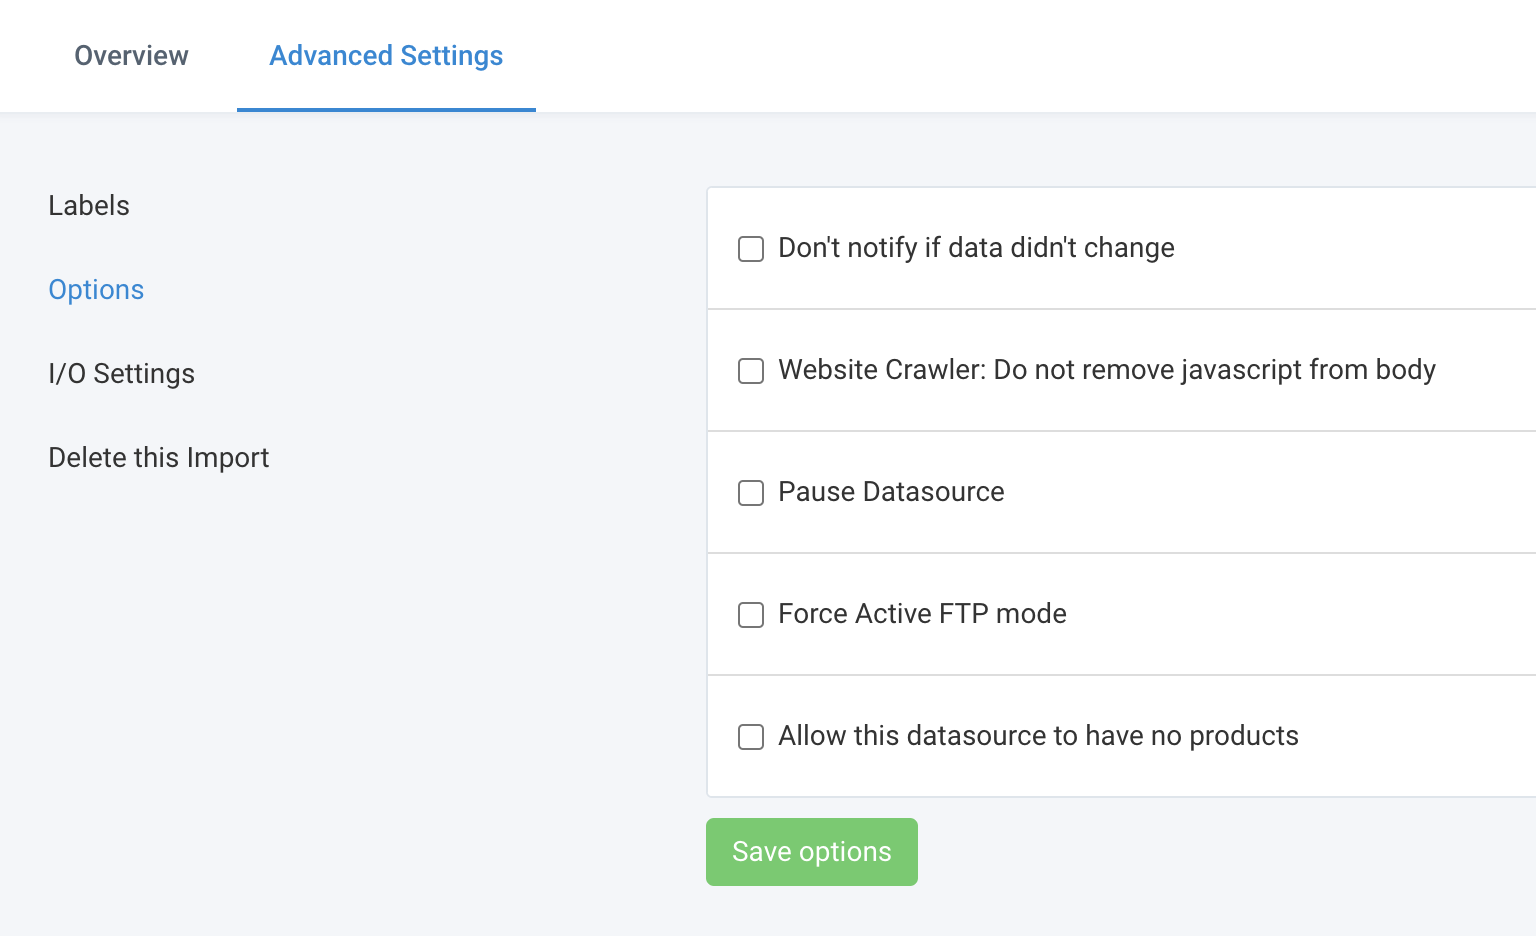 The Options section of the Advanced Settings tab in the data source setup